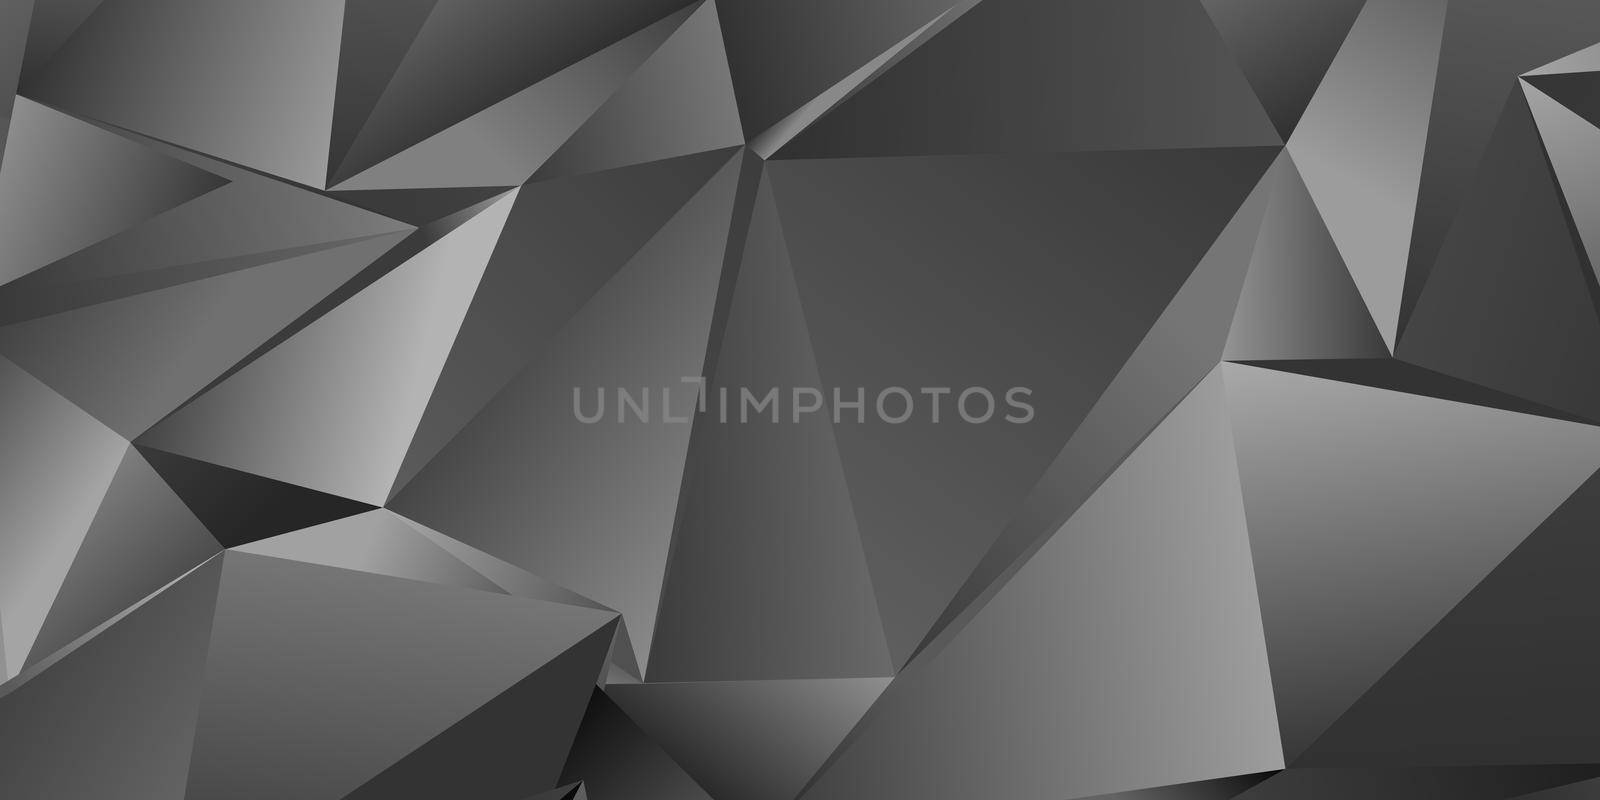 Abstract grey triangle background, low poly 3D illustration, geometric polygon pattern